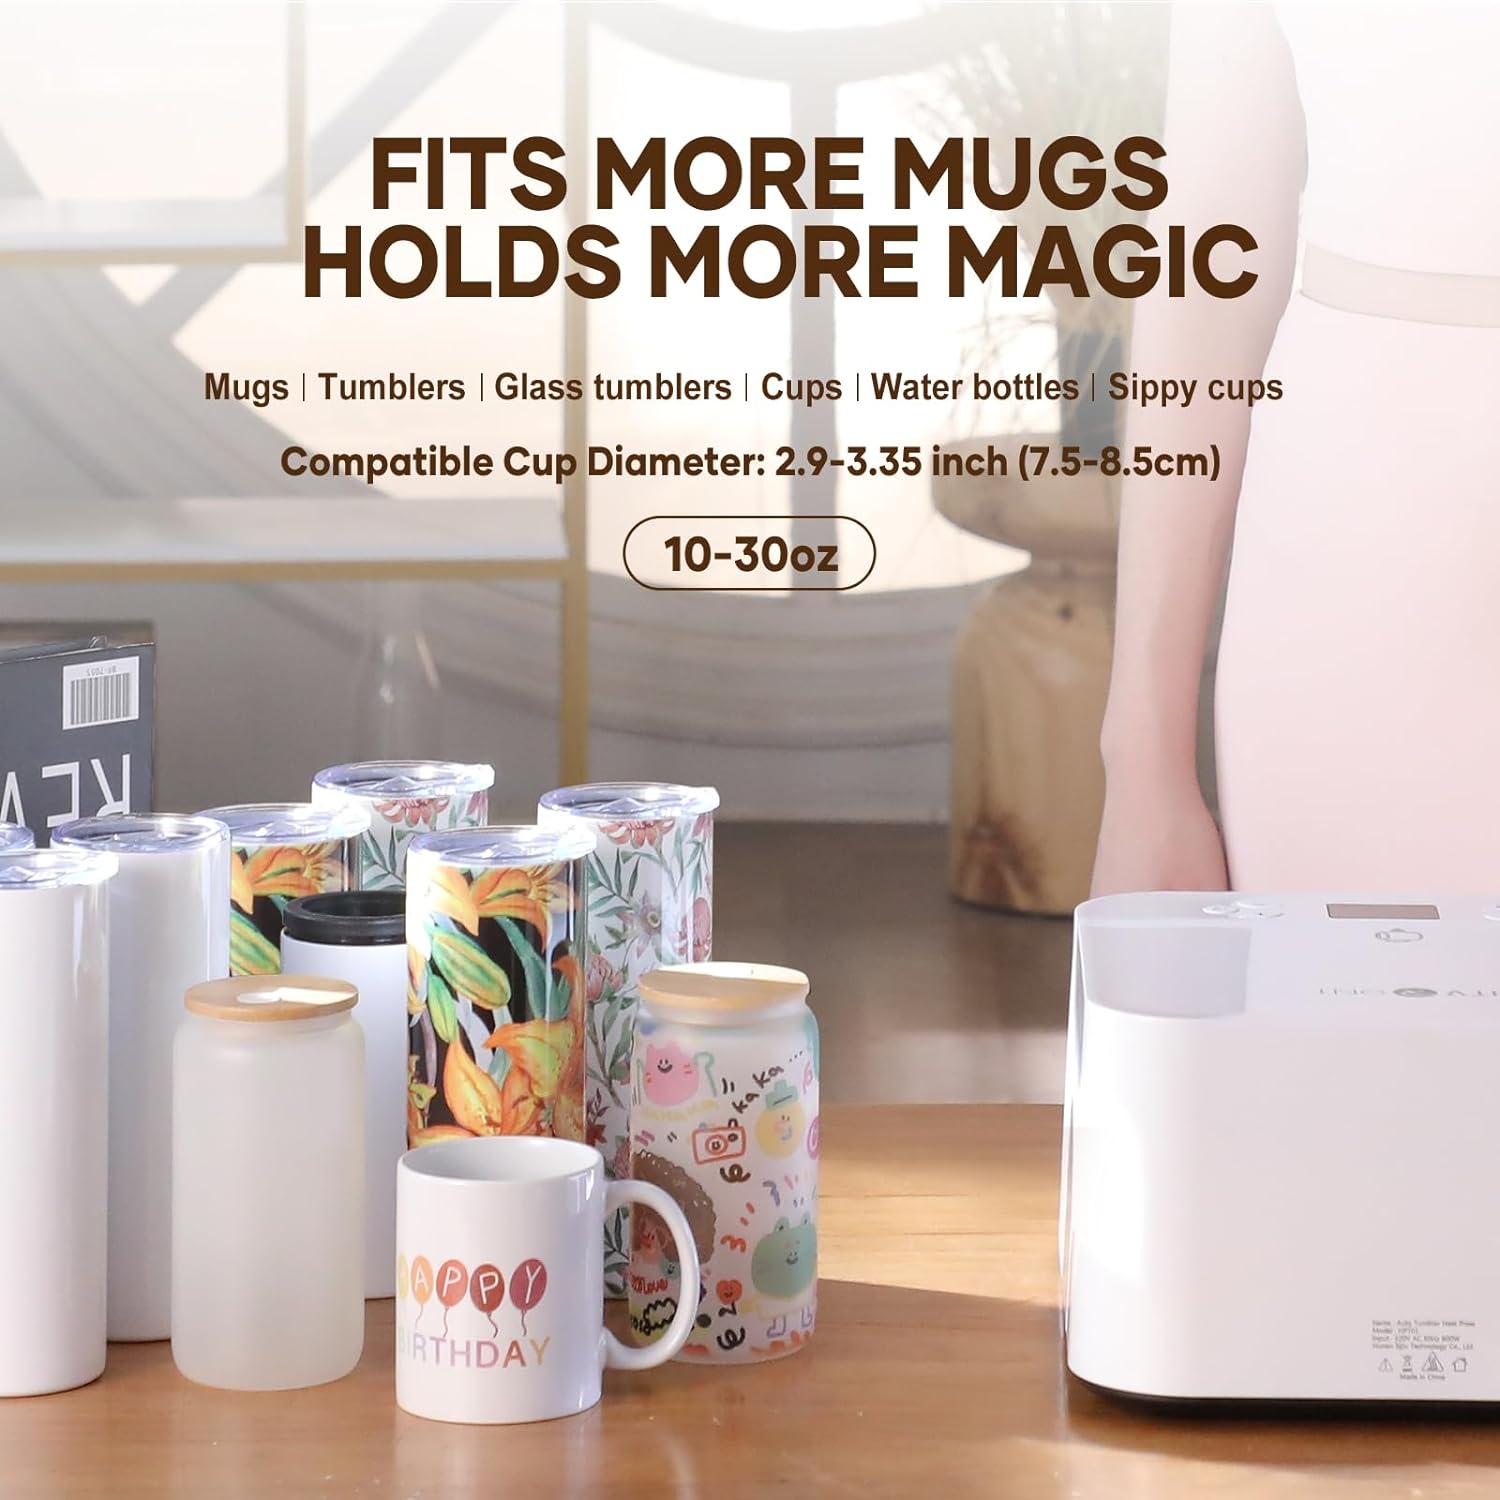 "Fits More Mugs, Holds More Magic" informational graphic about materials compatibility